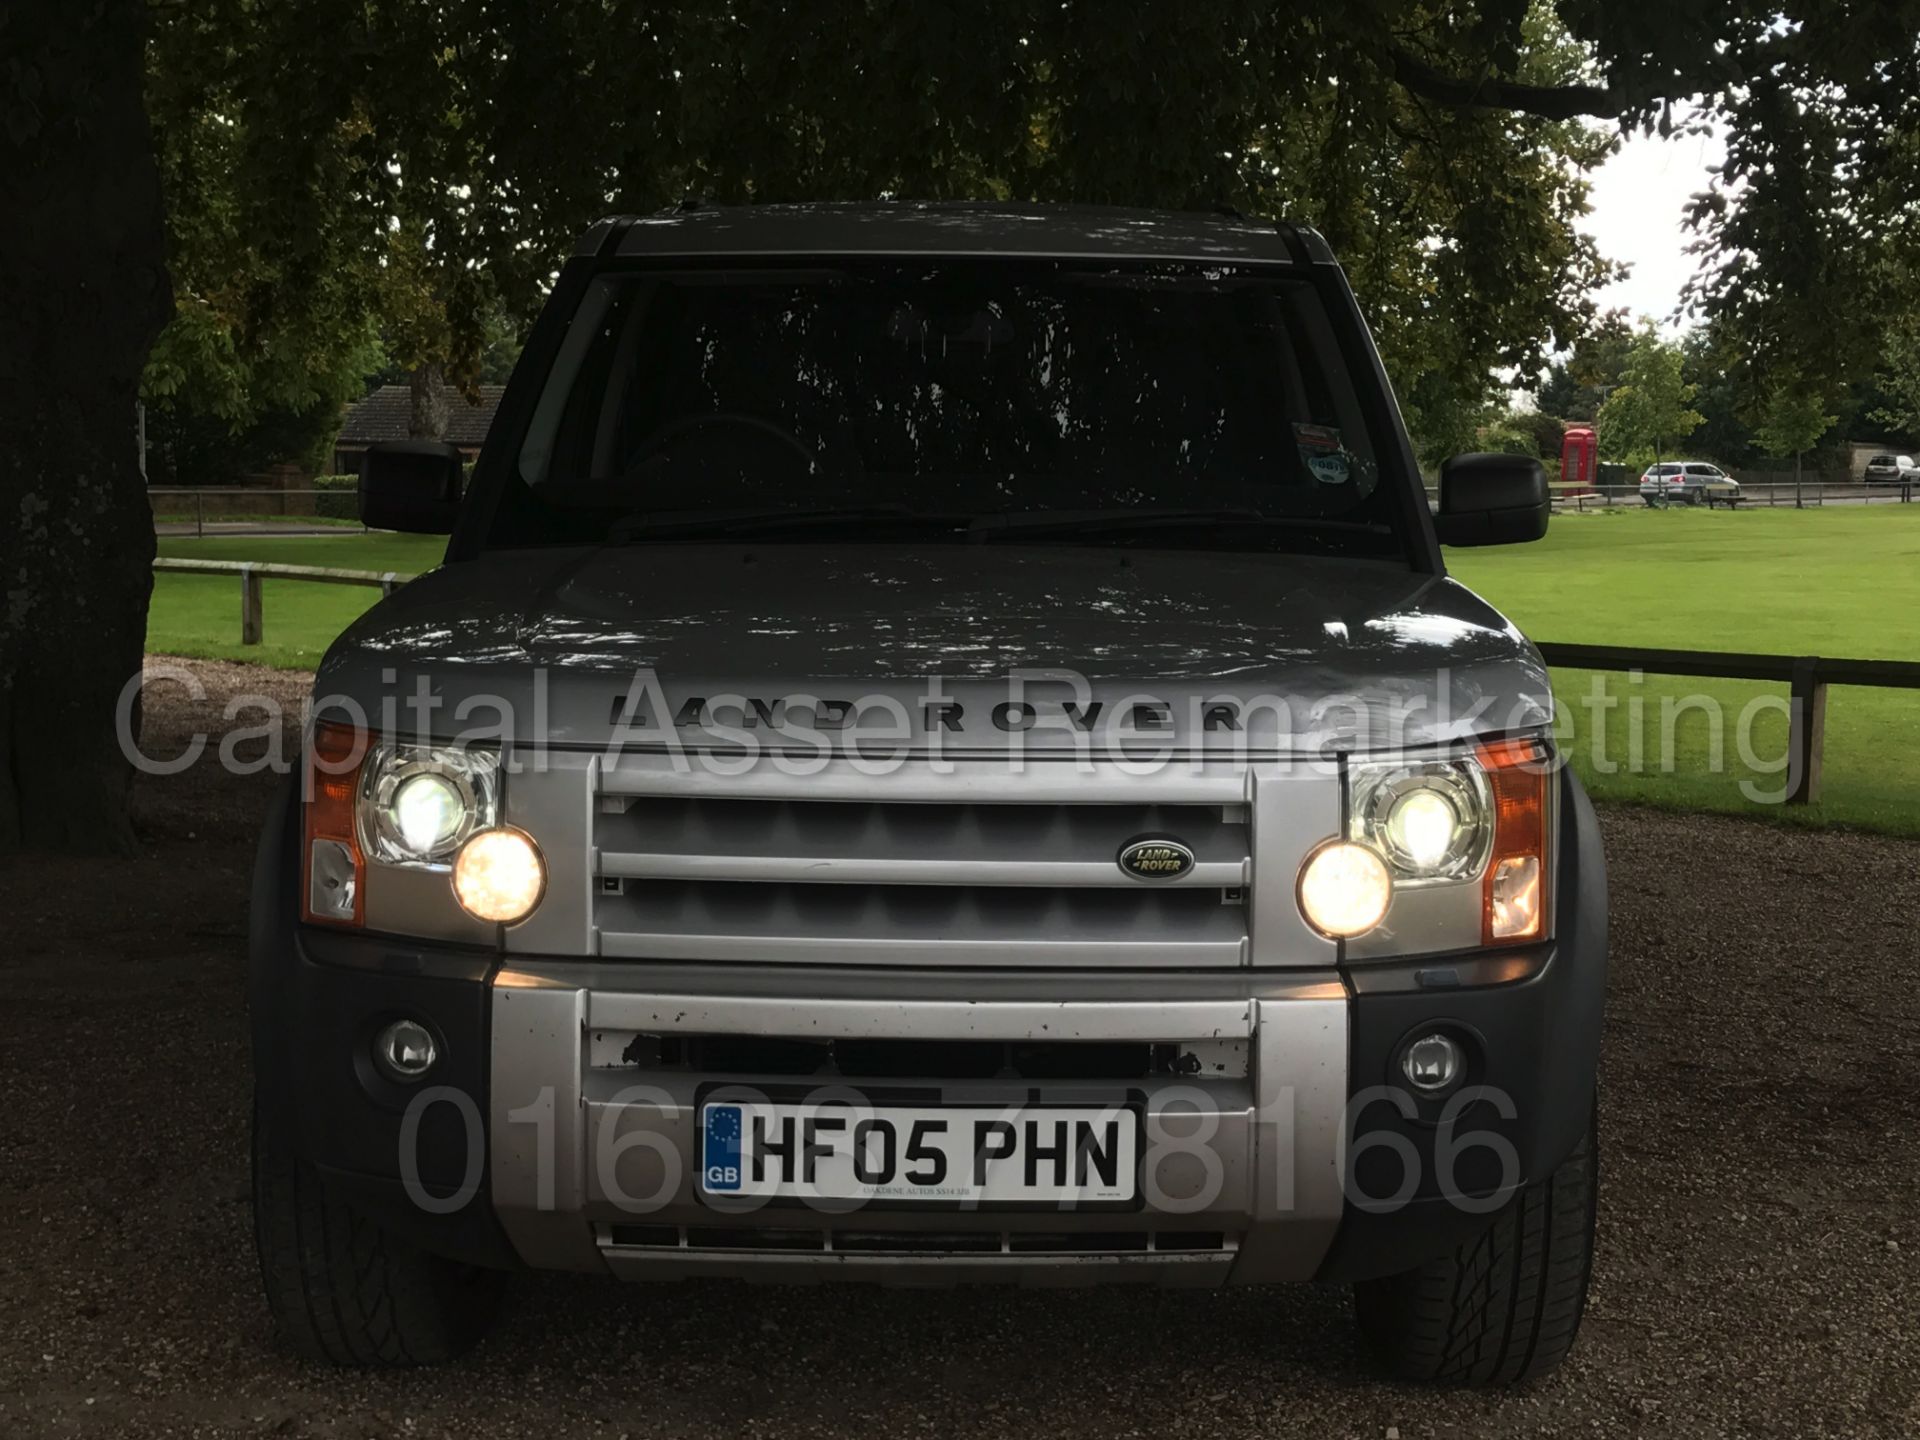 (On Sale) LAND ROVER DISCOVERY 3 (2005 - FACELIFT MODEL) 'TDV6 - AUTO - 7 SEATER - SAT NAV' (NO VAT) - Image 3 of 36